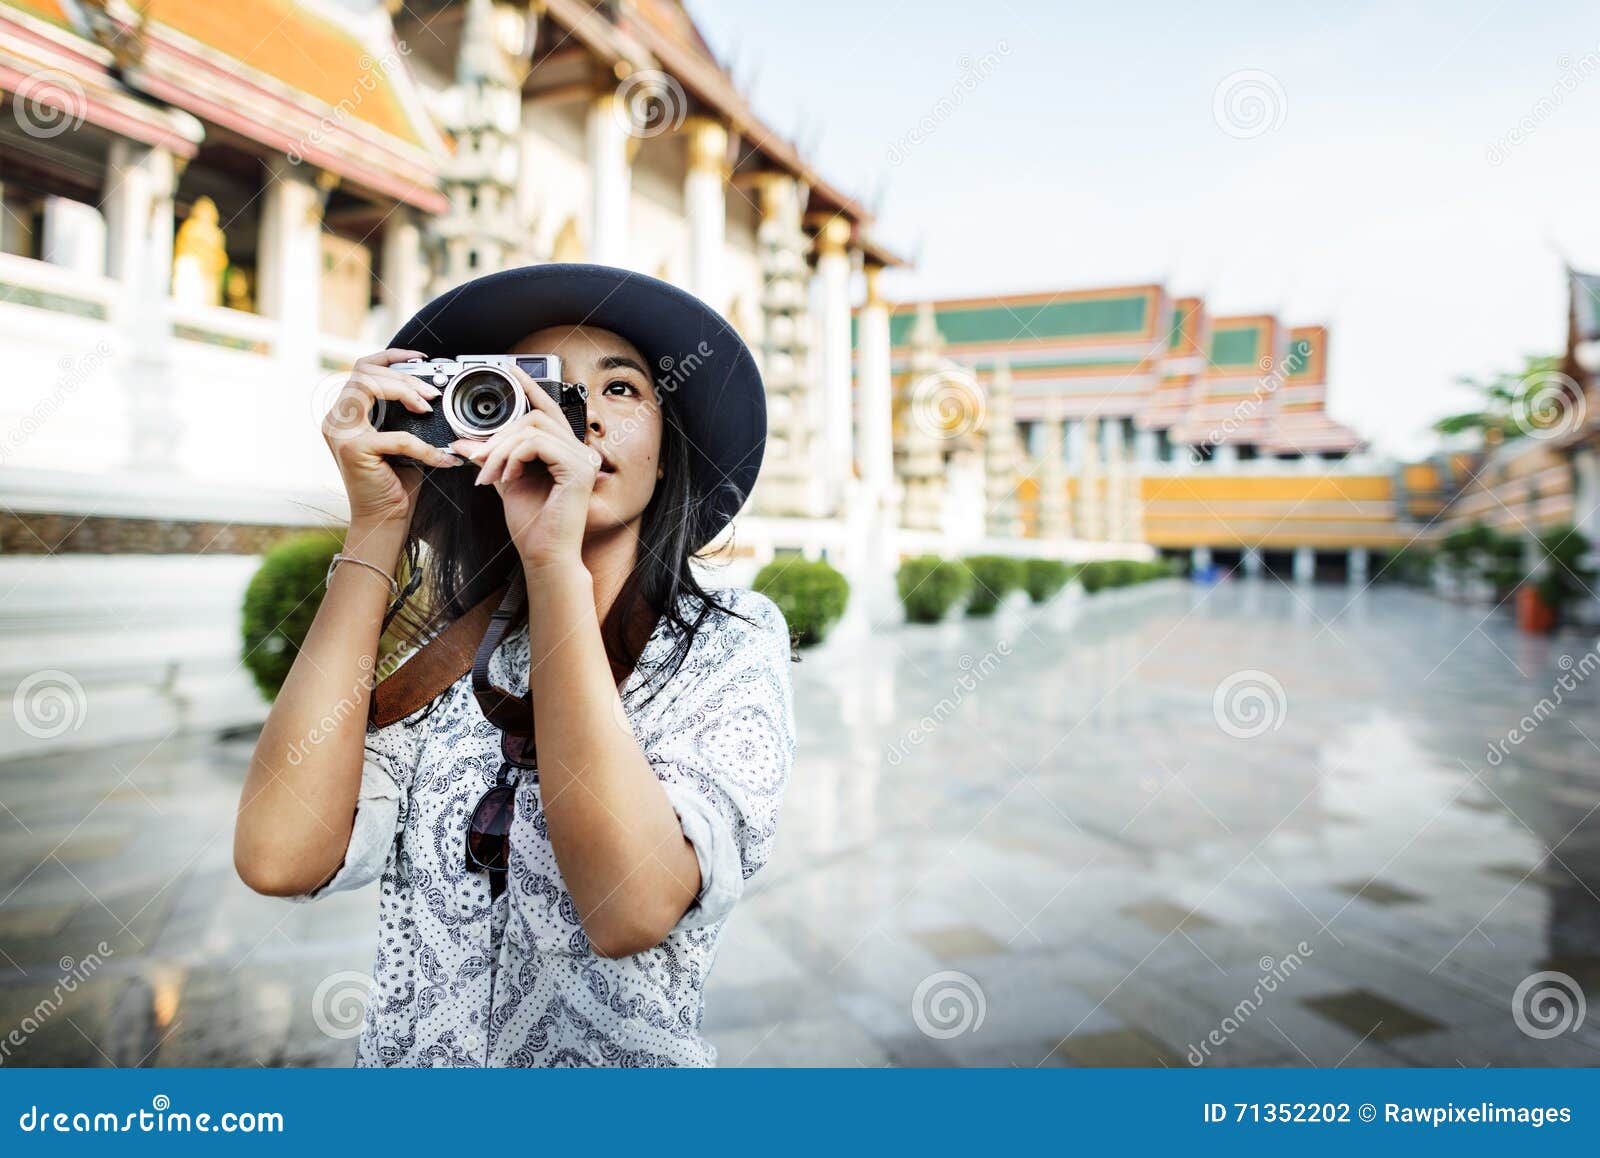 photographer travel sightseeing wander hobby recreation concept